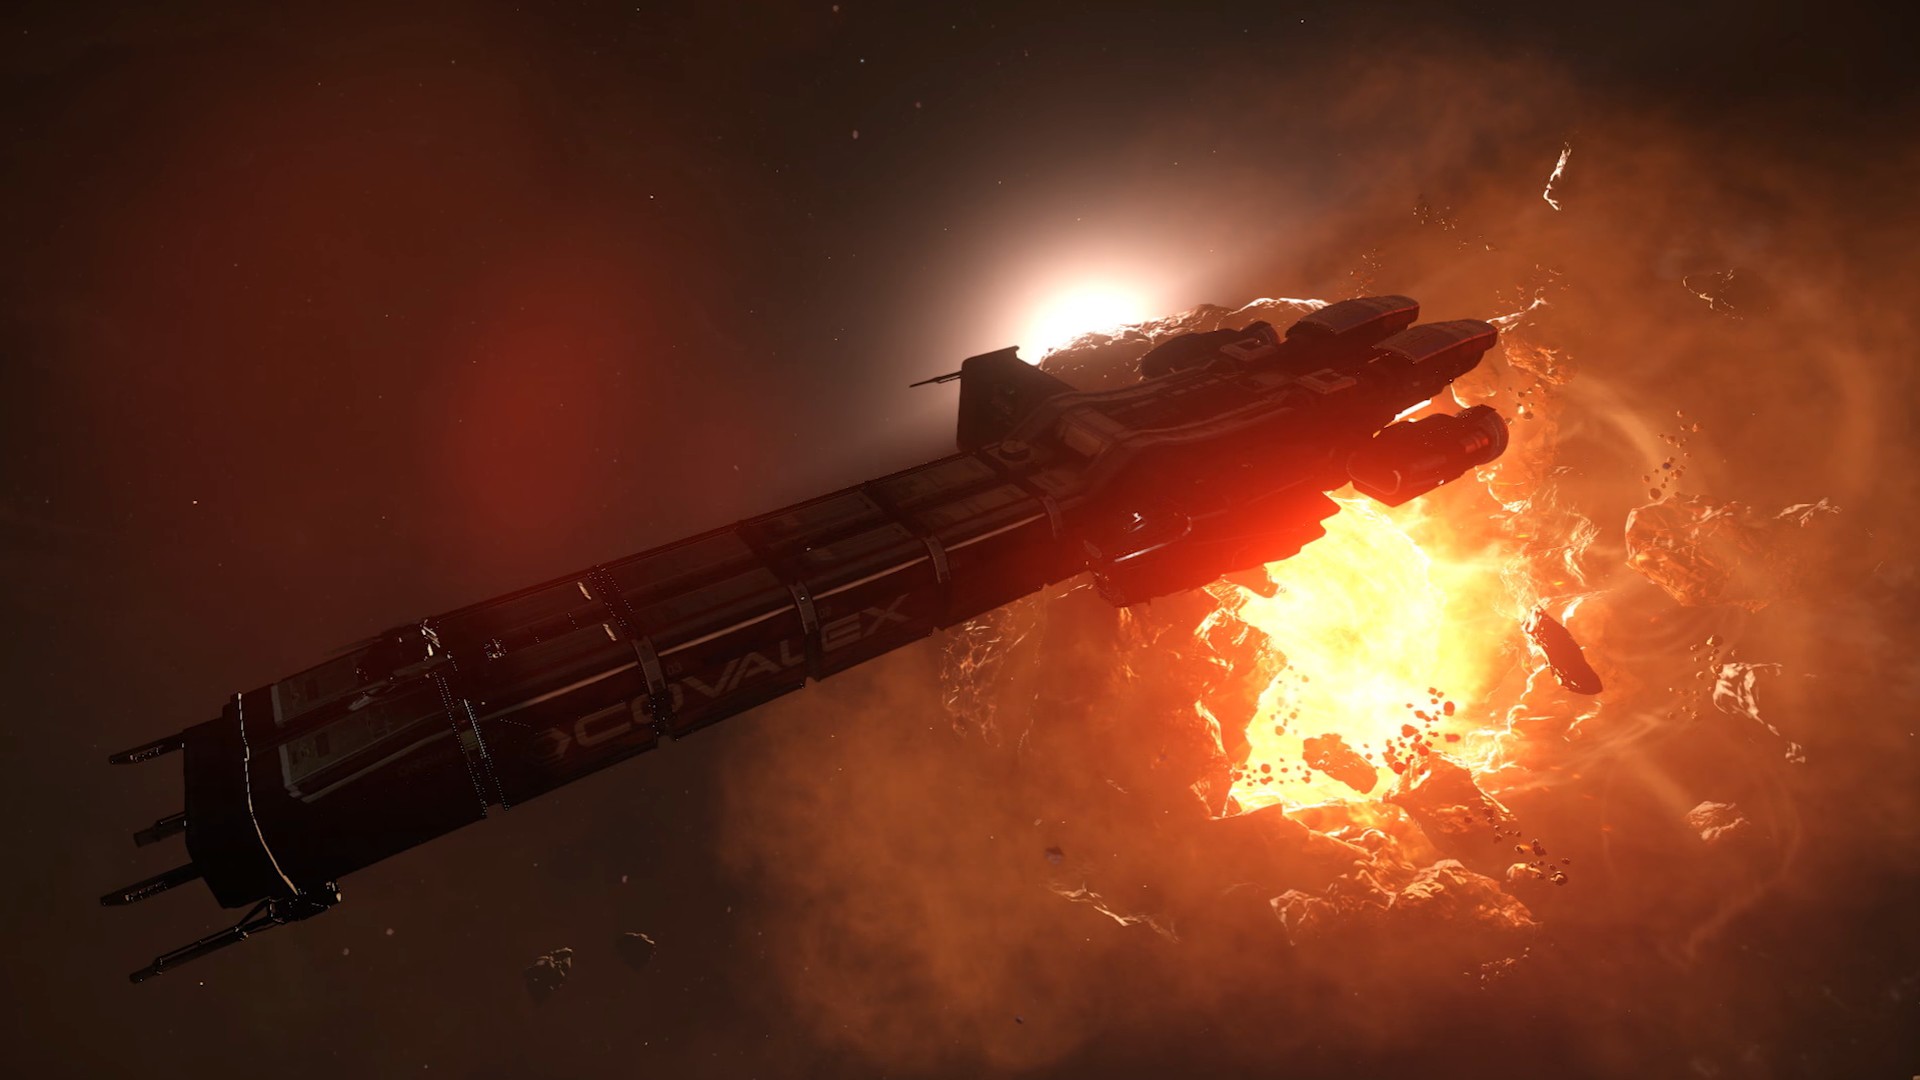 Star Citizen Gets An Exciting New Trailer